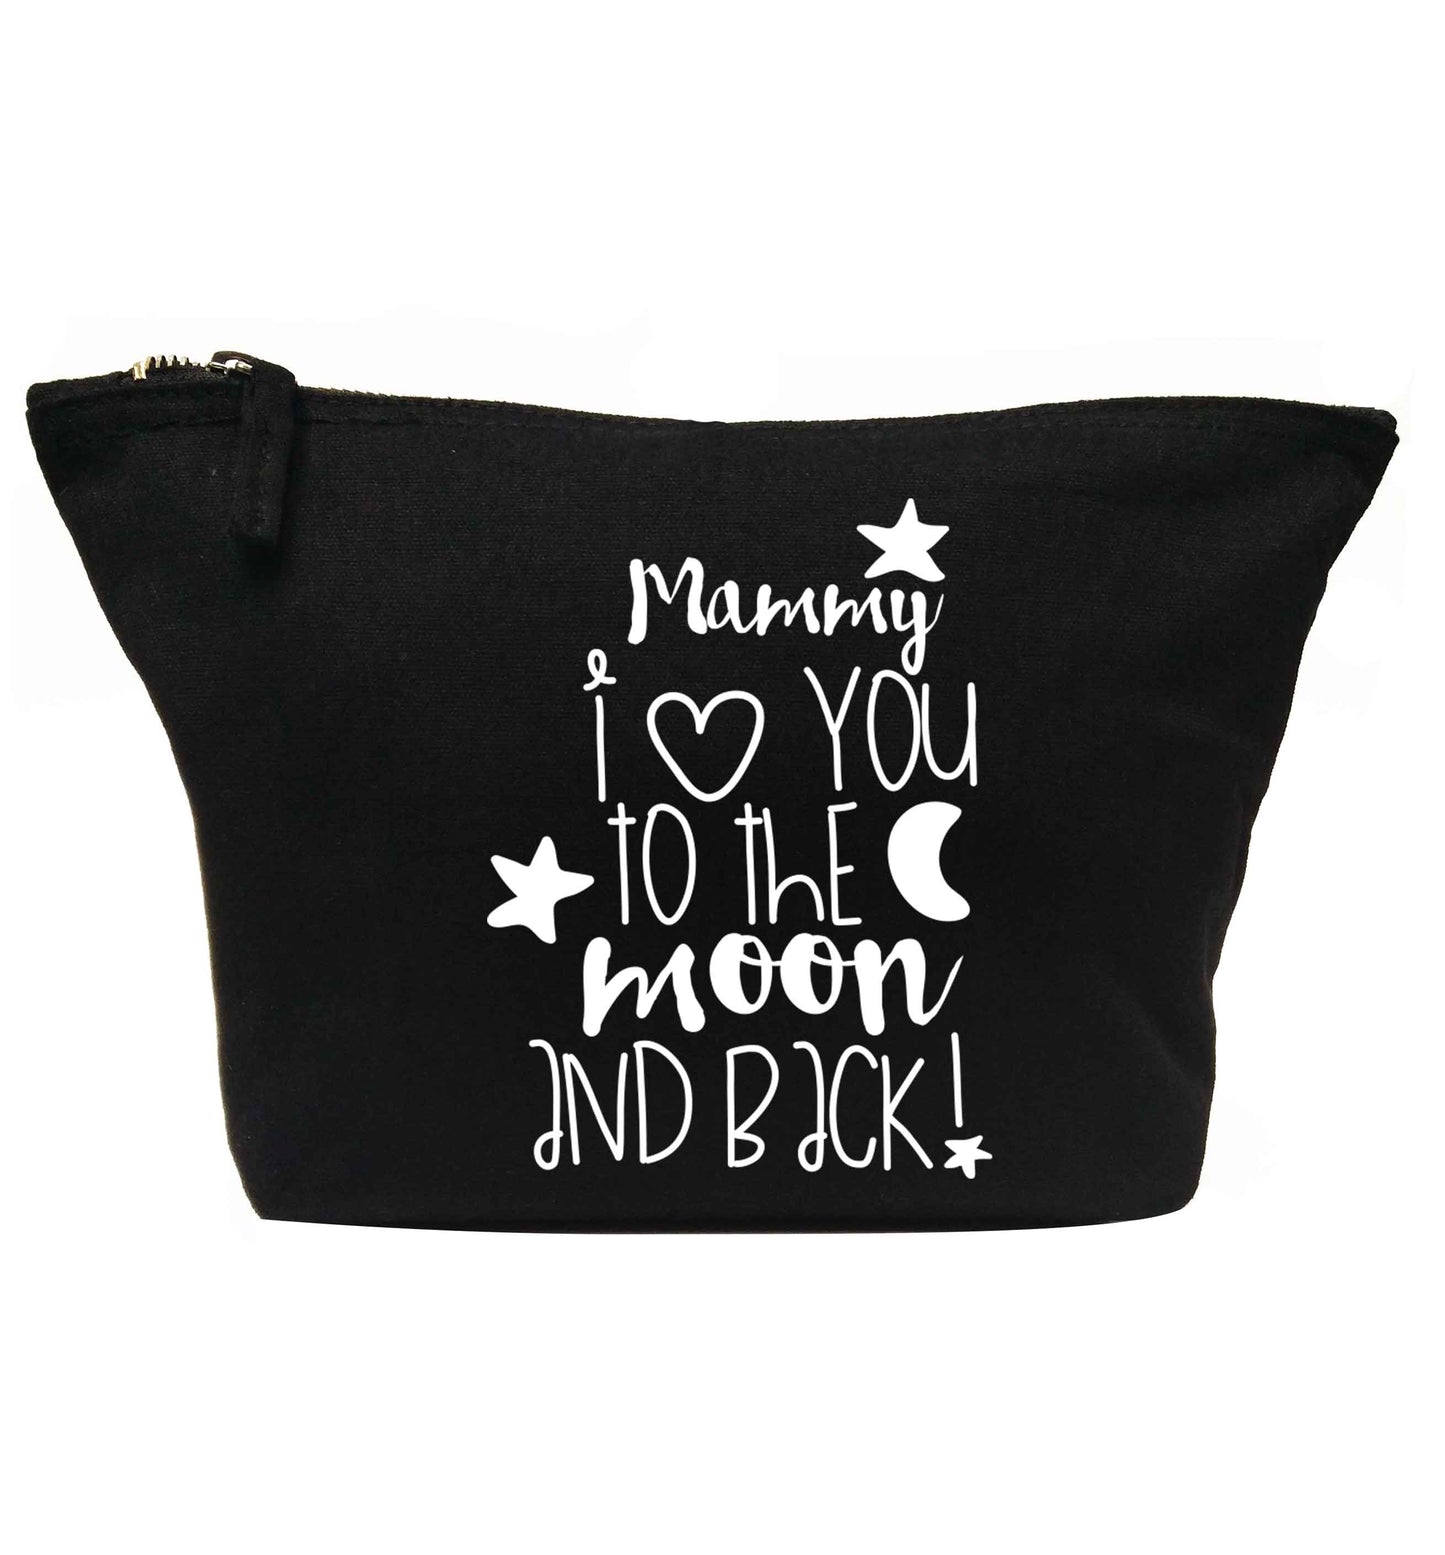 Mammy I love you to the moon and back | Makeup / wash bag